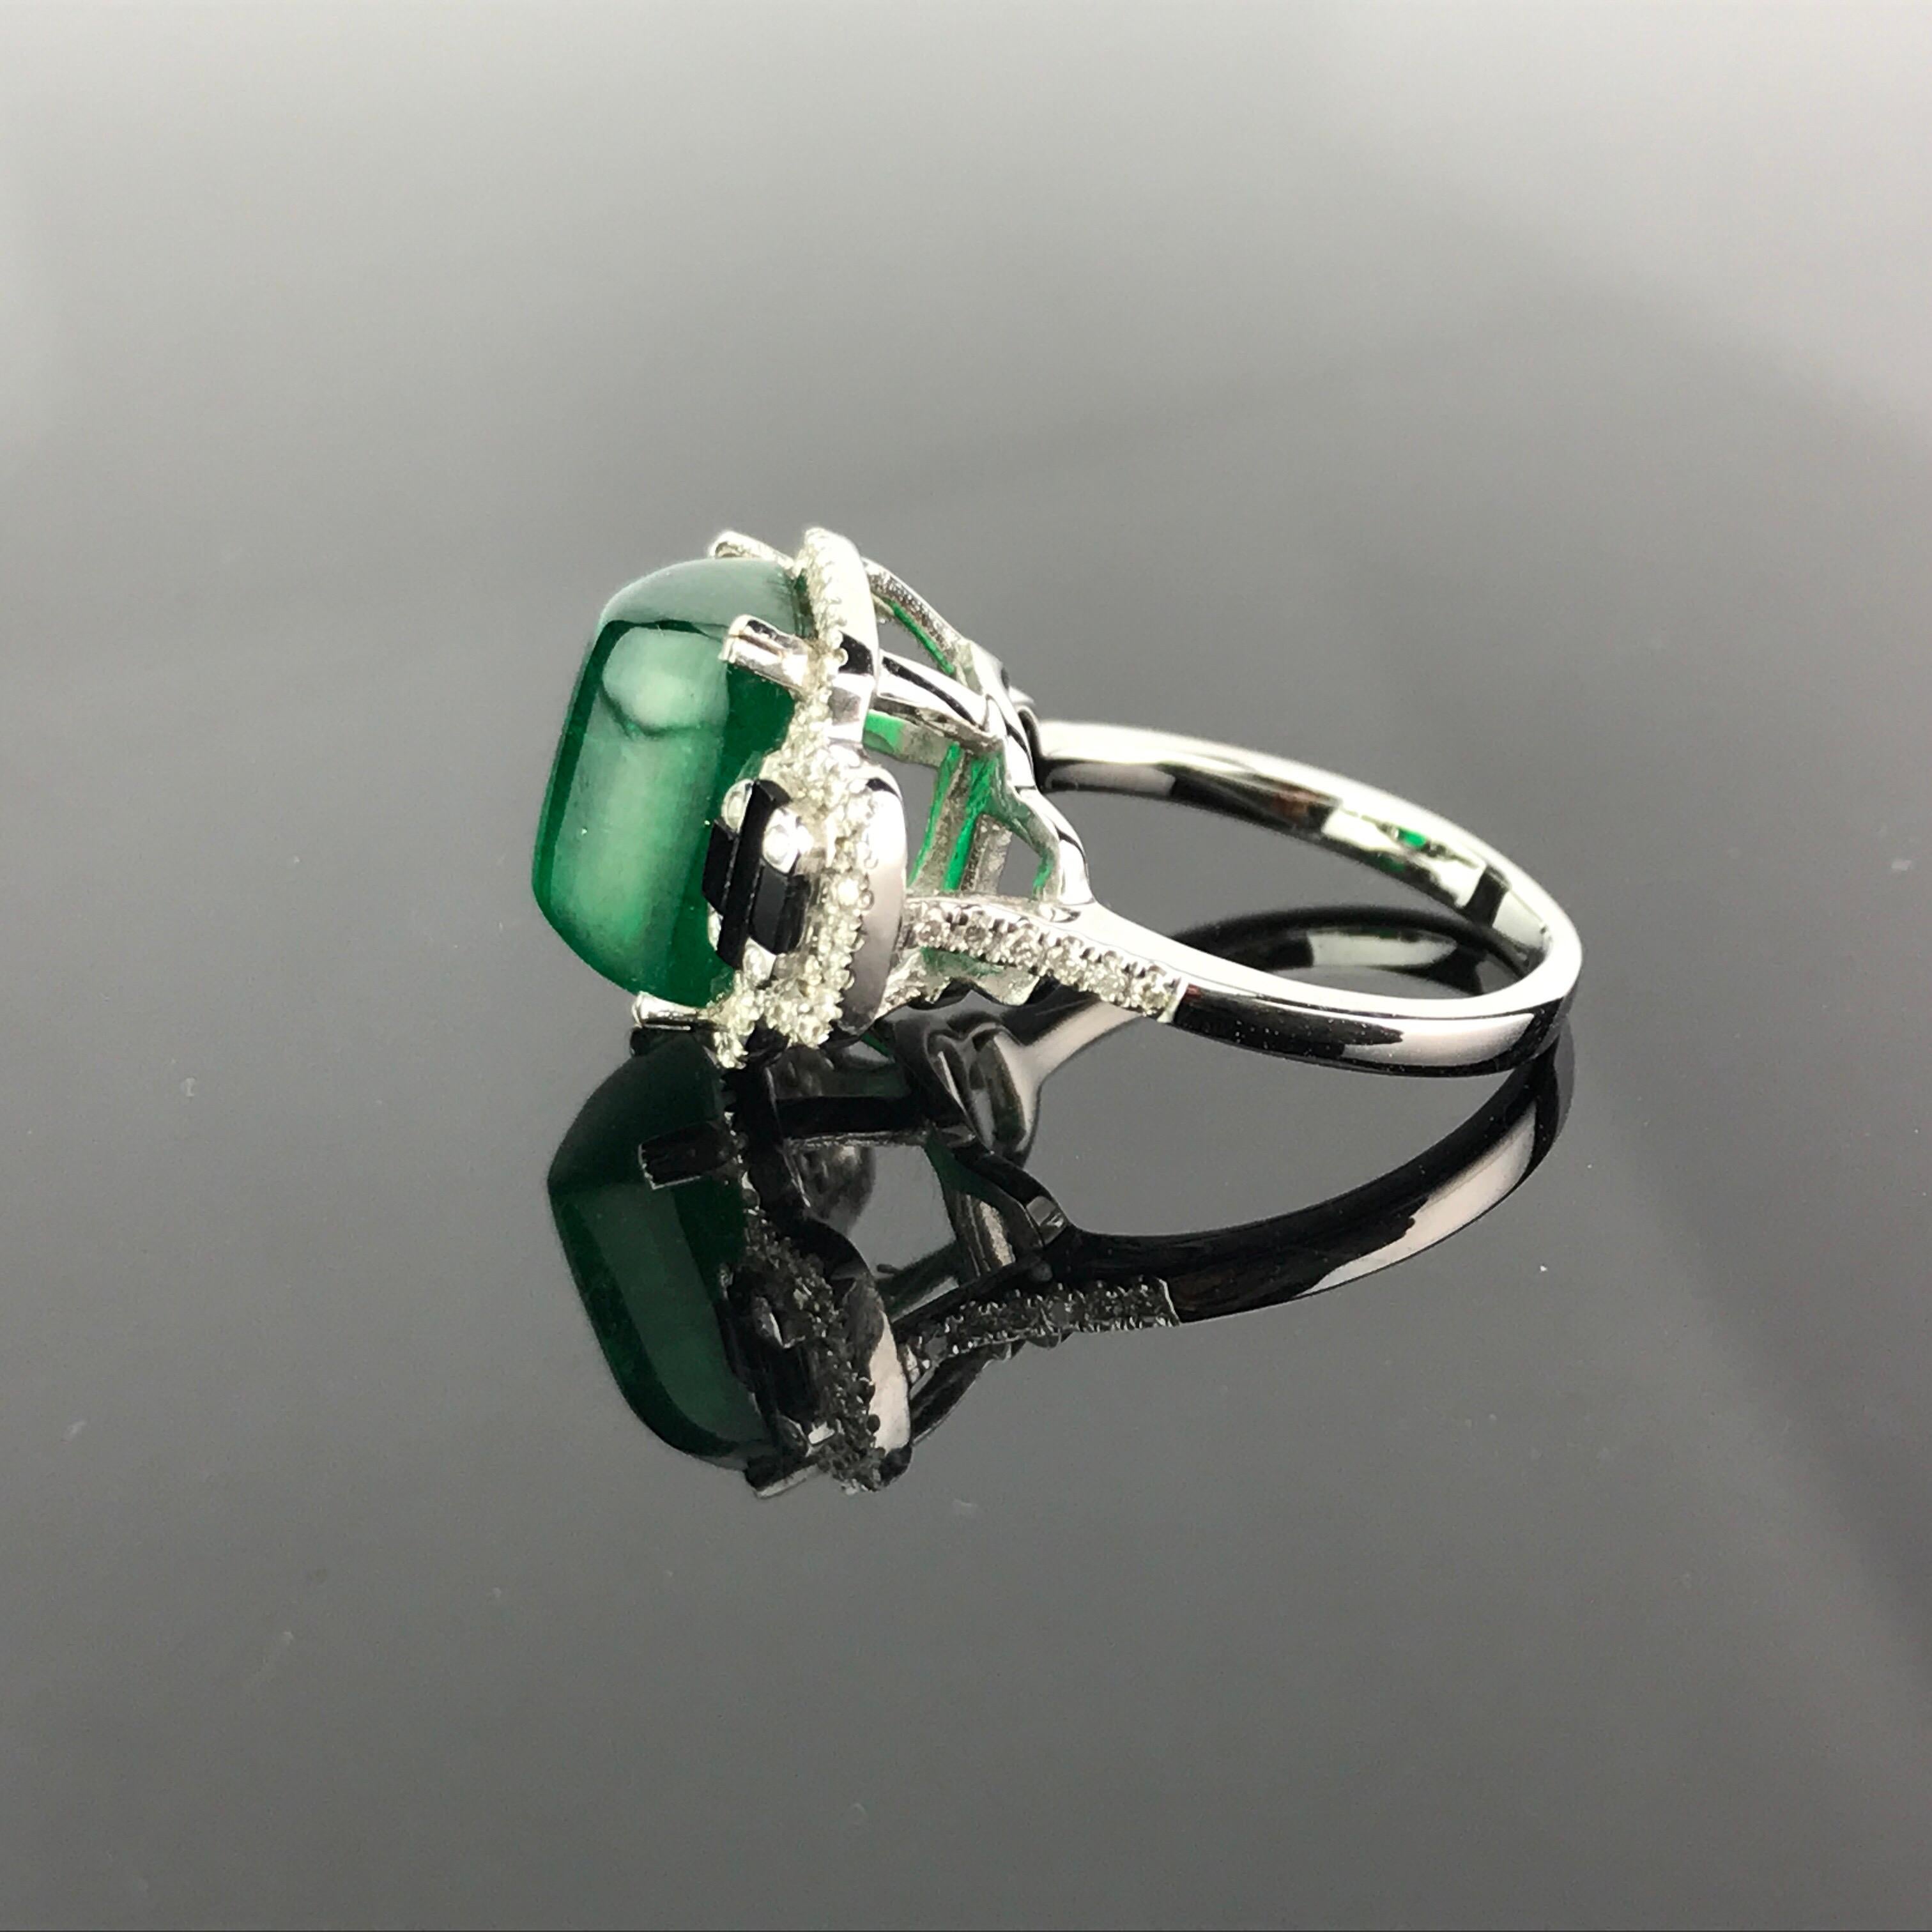 Art Deco 5.62 Carat Sugarloaf Shaped Emerald, Diamond and Black Onyx Cocktail Ring